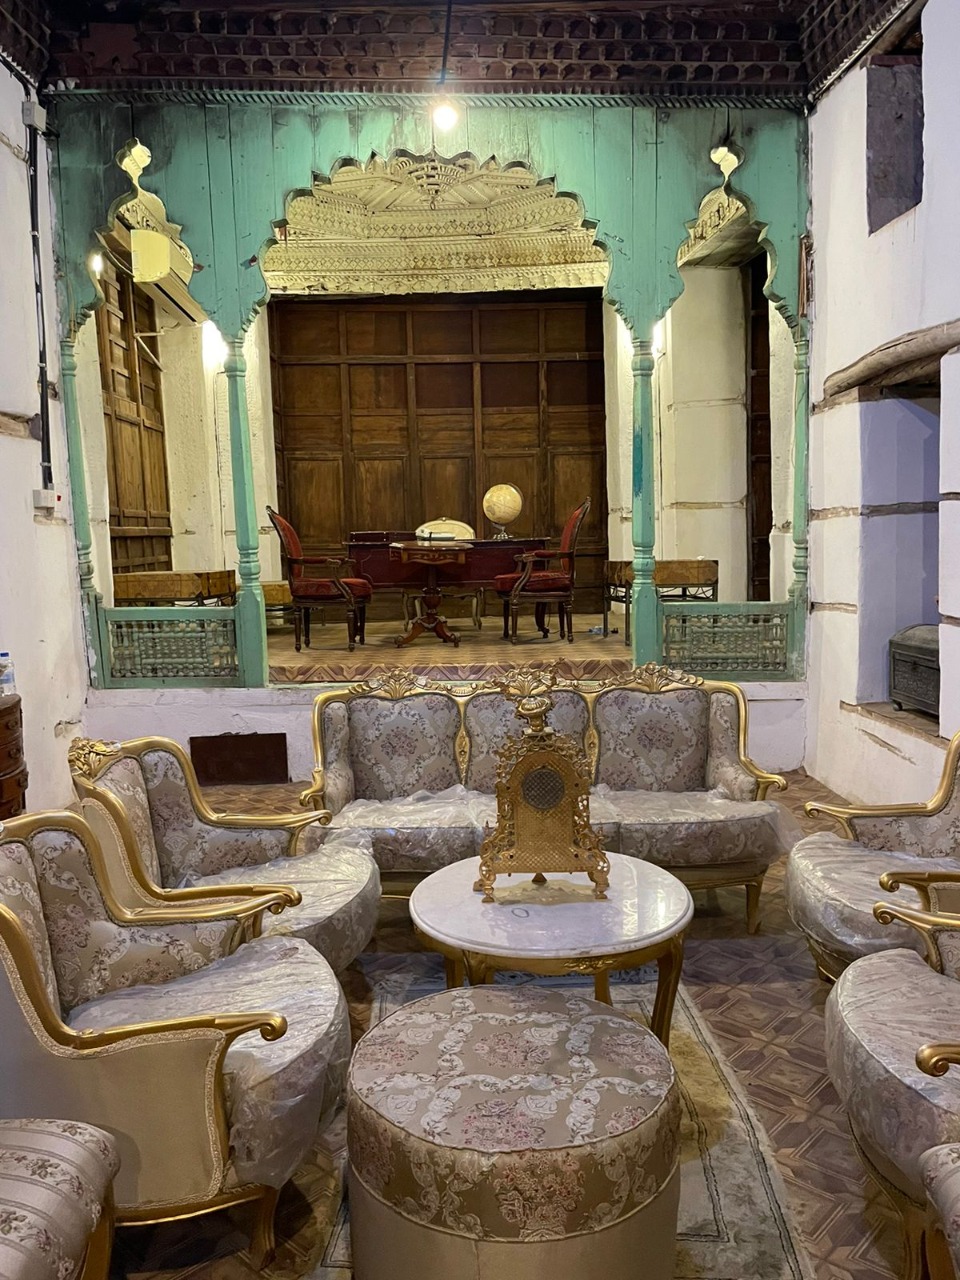 Spend a day in a historic Jeddah house